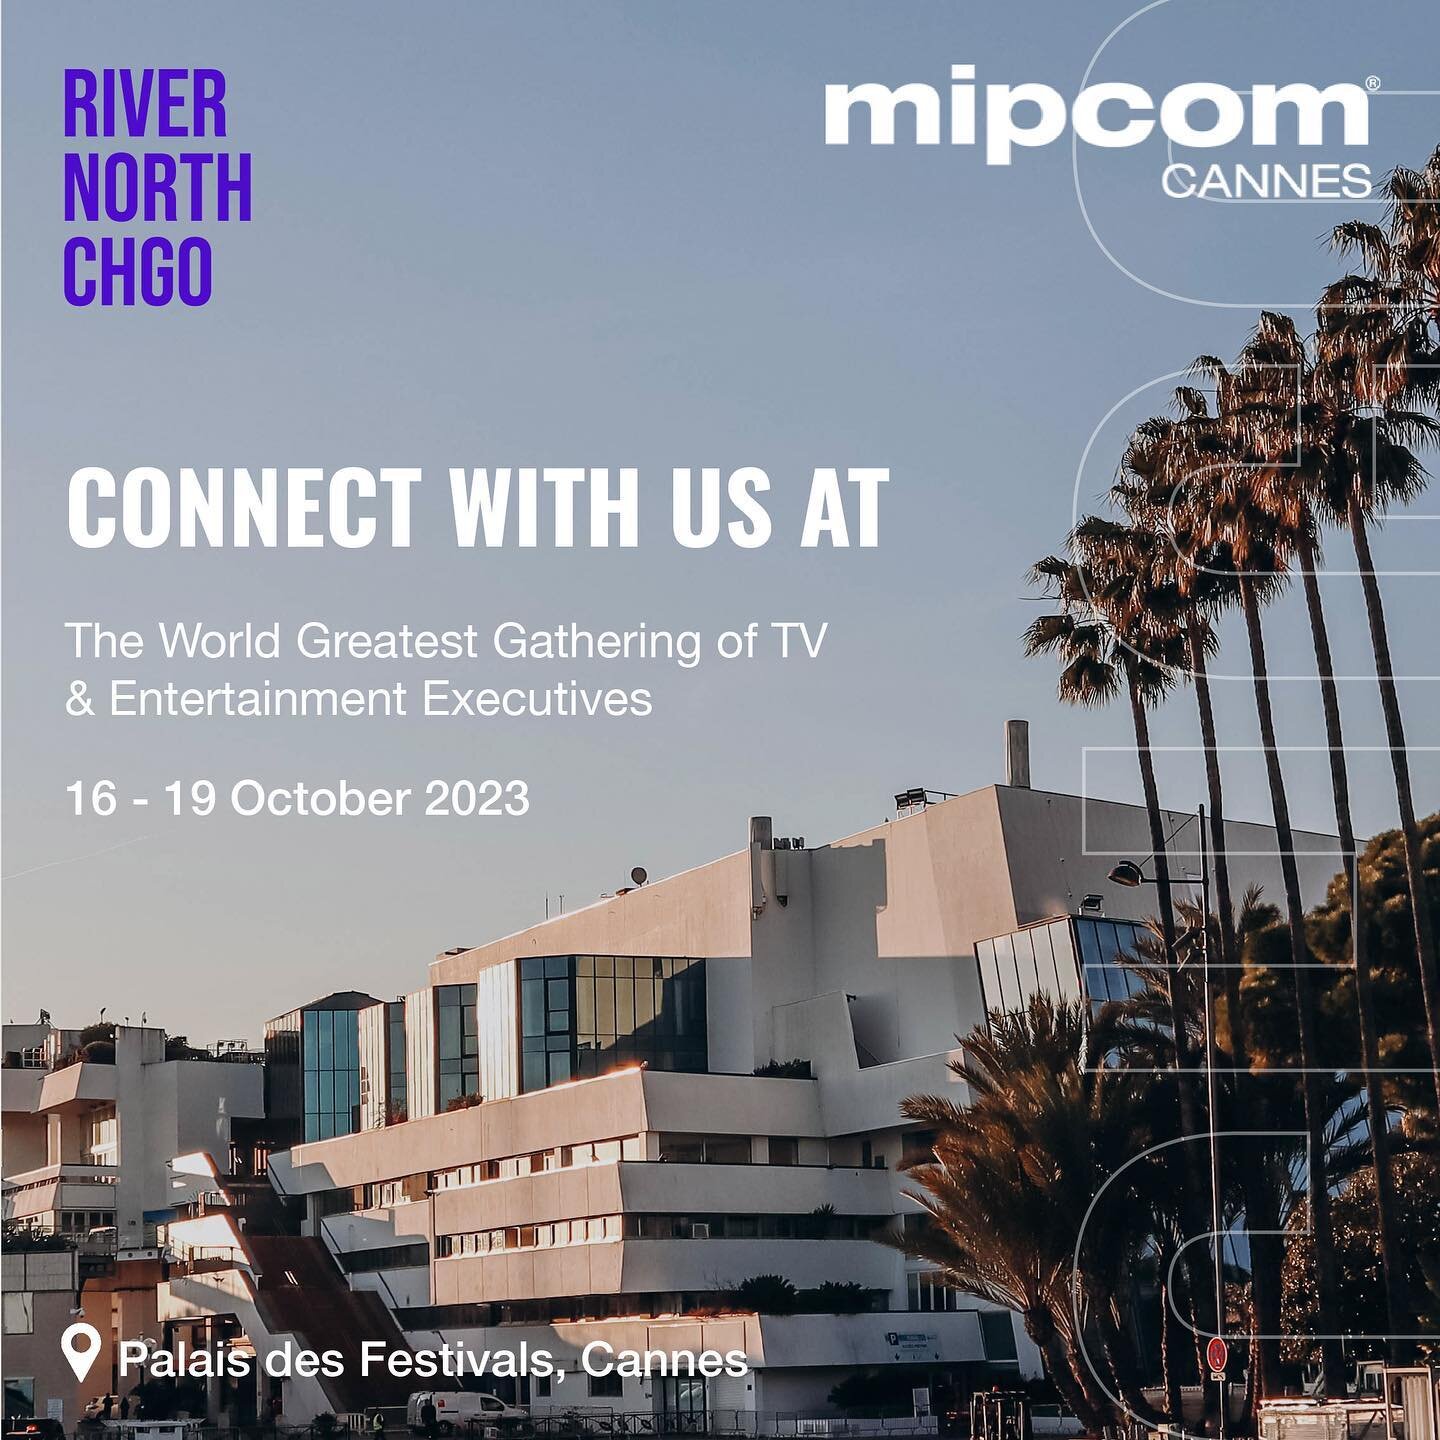 River North CHGO is attending MIPCOM 2023!

We are delighted to announce that our beloved River North Chgo community is at #MIPCOM2023, The World Greatest Gathering of TV &amp; Entertainment Executives!

Meet us throughout the week, where we anticipa